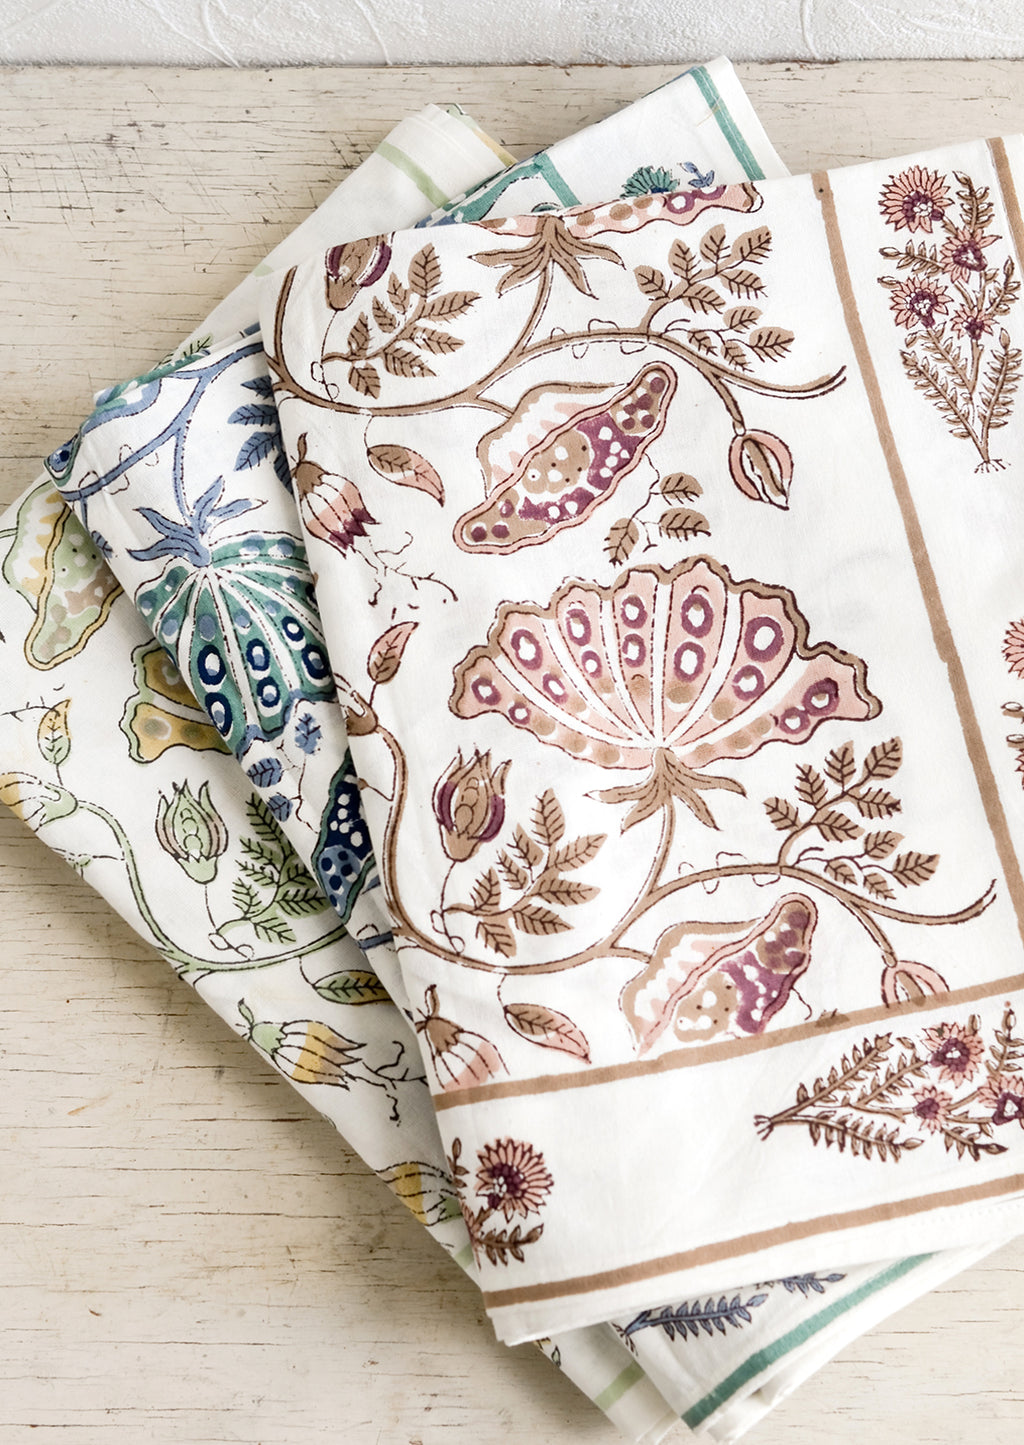 3: A stack of botanical block printed tablecloths in three colors.